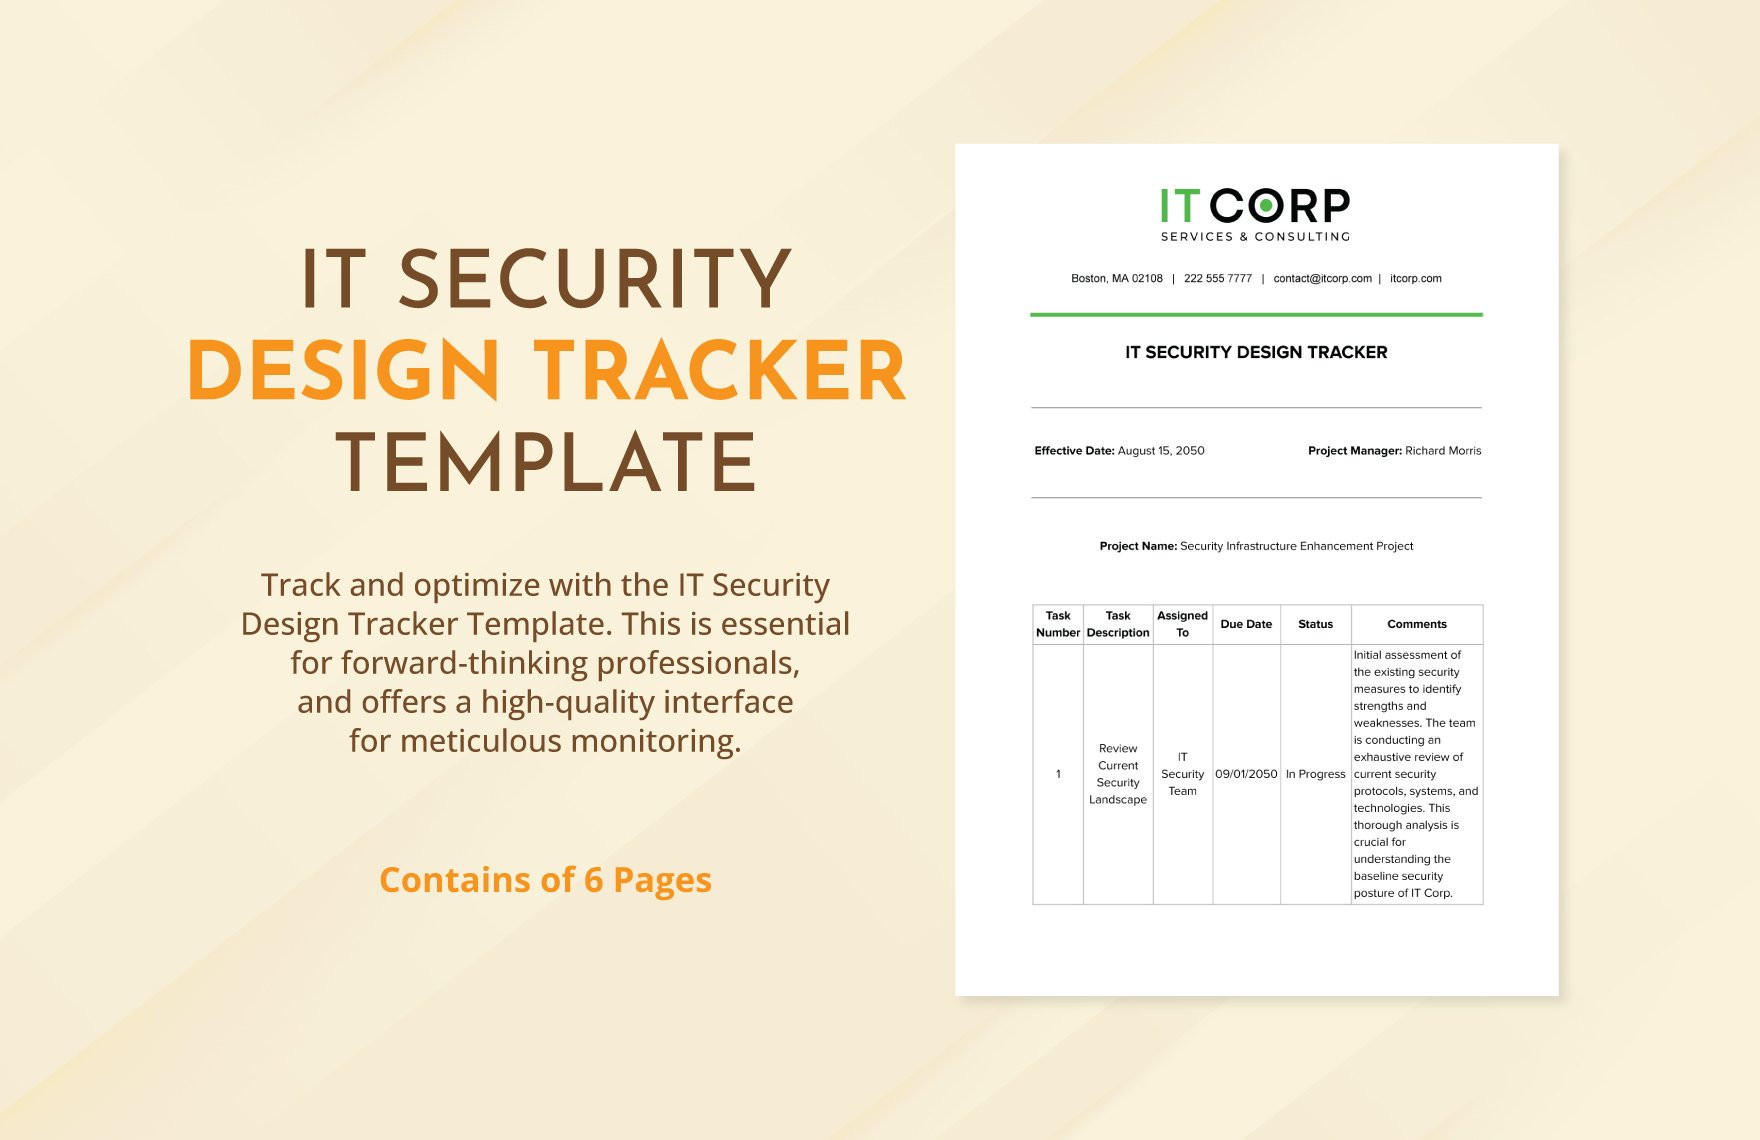 IT Security Design Tracker Template in Word, Google Docs, PDF